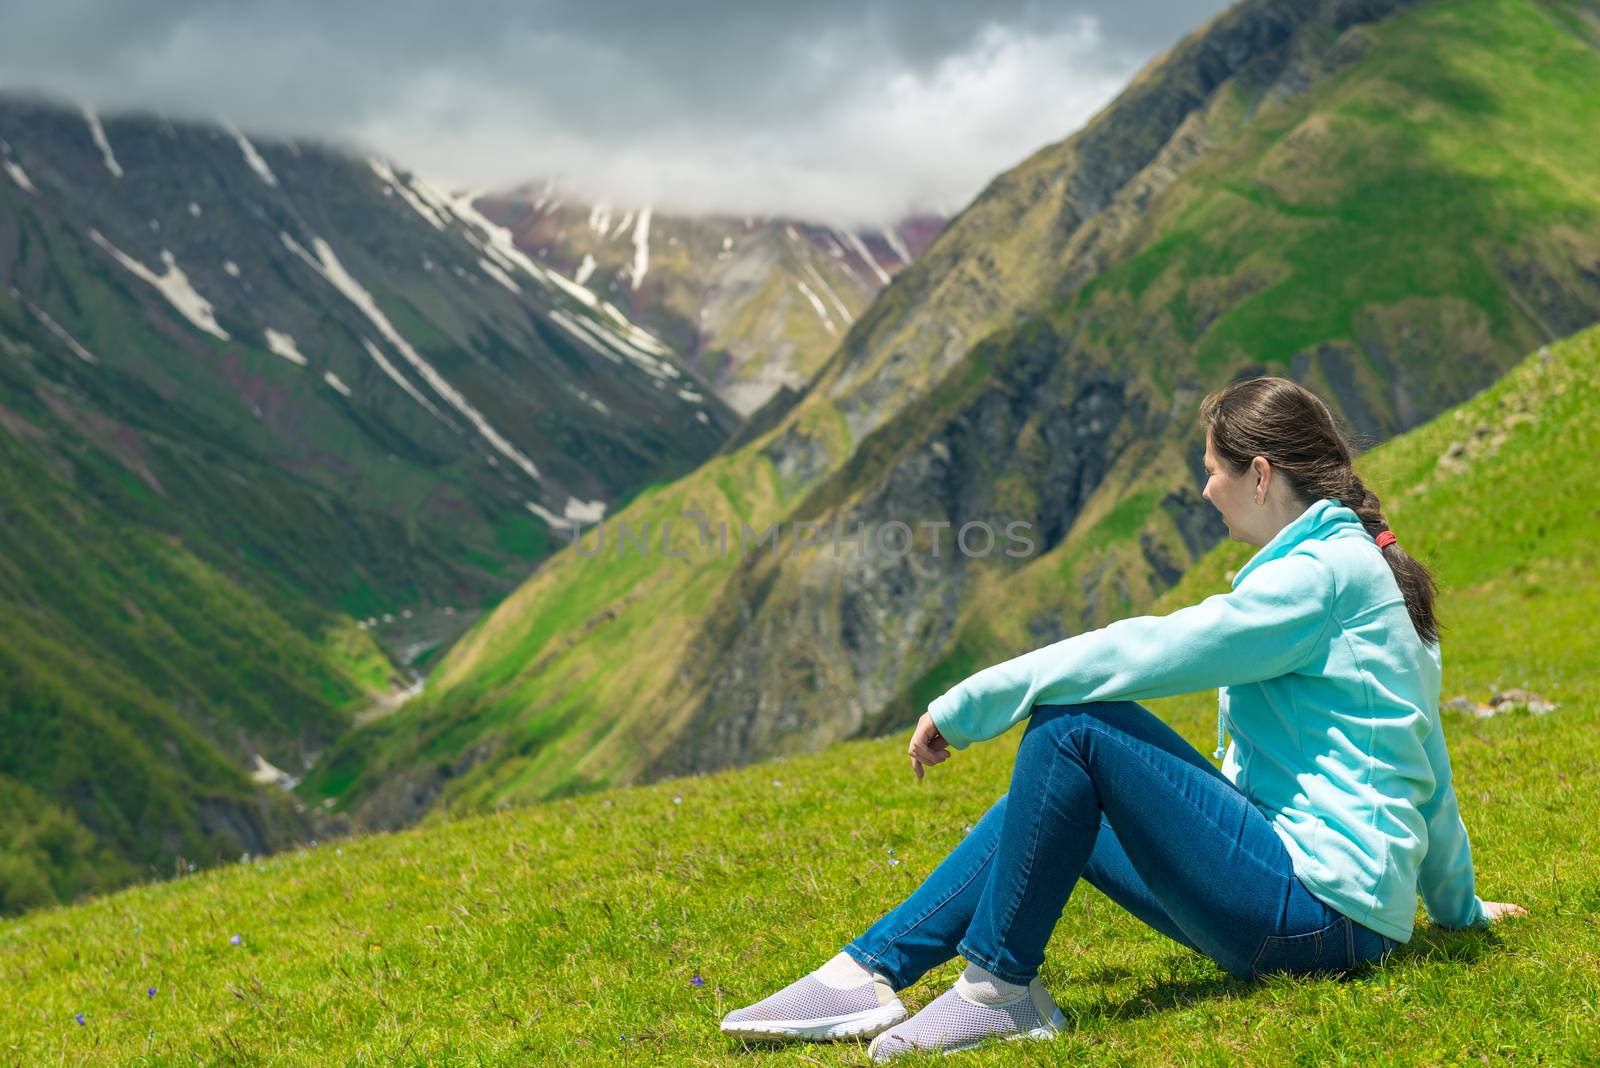 A woman sits on the grass and admires the beautiful mountain lan by kosmsos111